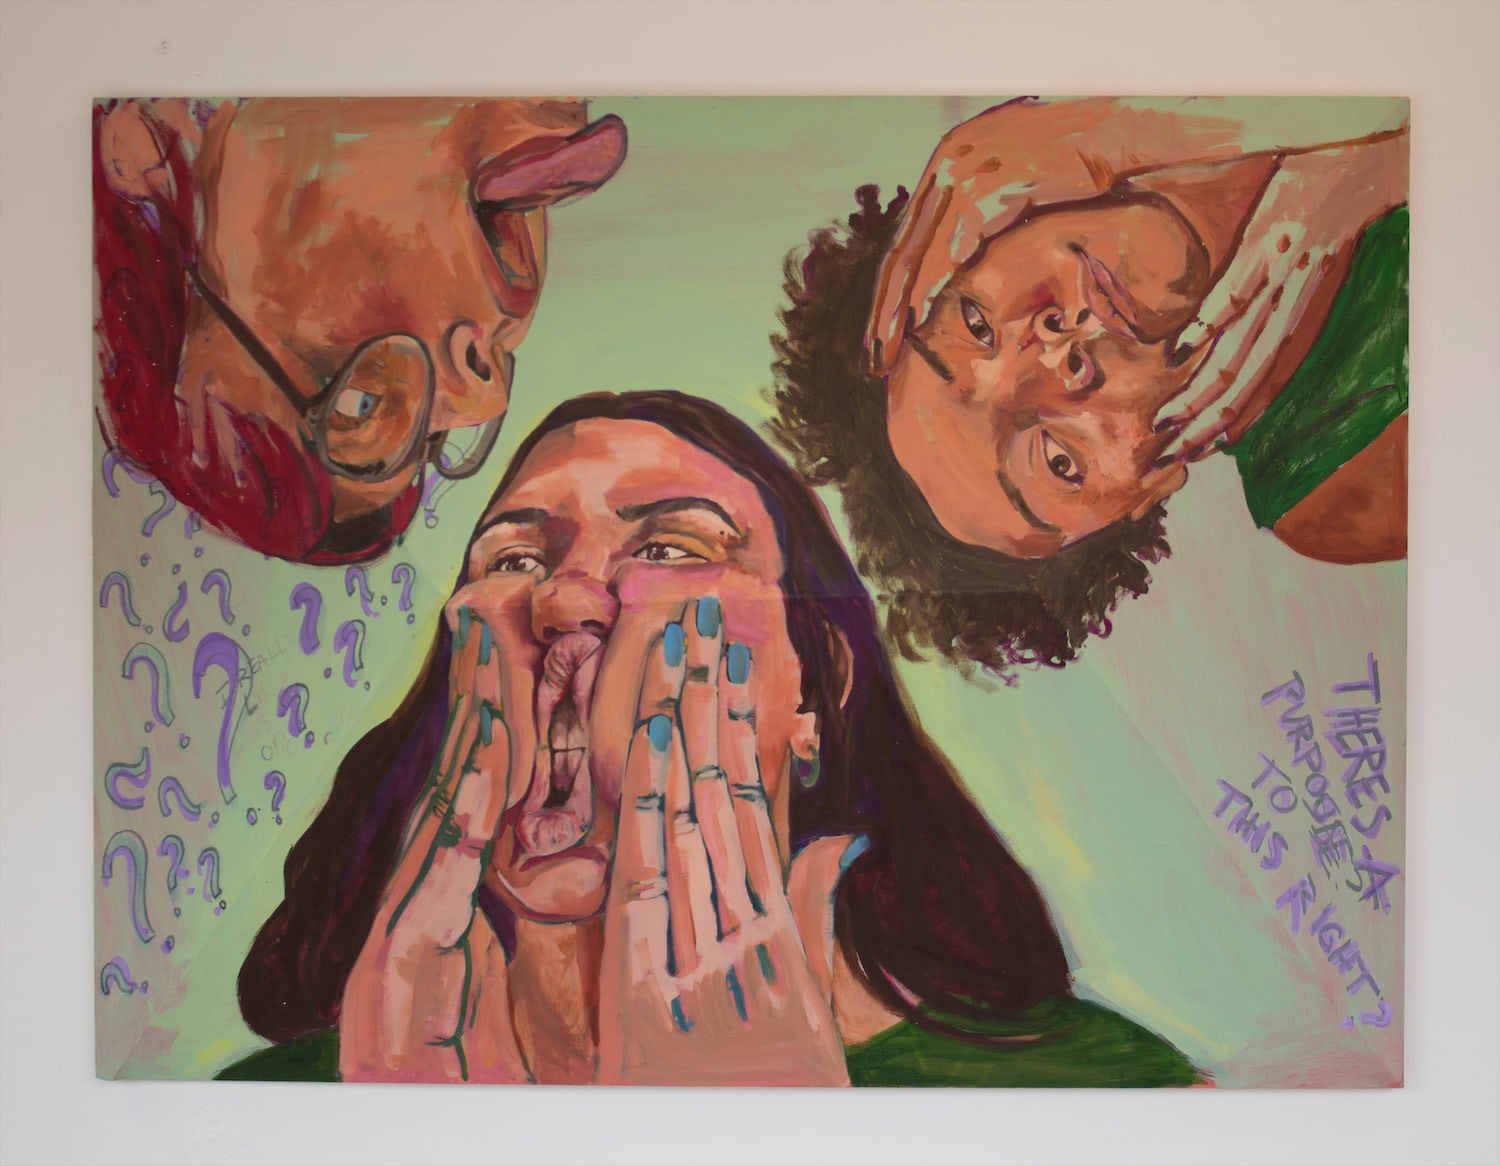 This work has a three demential frame with a soft green background and three figures with vivd facial expressions. One is sticking their tongue out, another is squishing their face and lips with their hands, and lastly the third figure is caressing their face looking forward to the viewer. The background shows question marks painted in purple and the question 